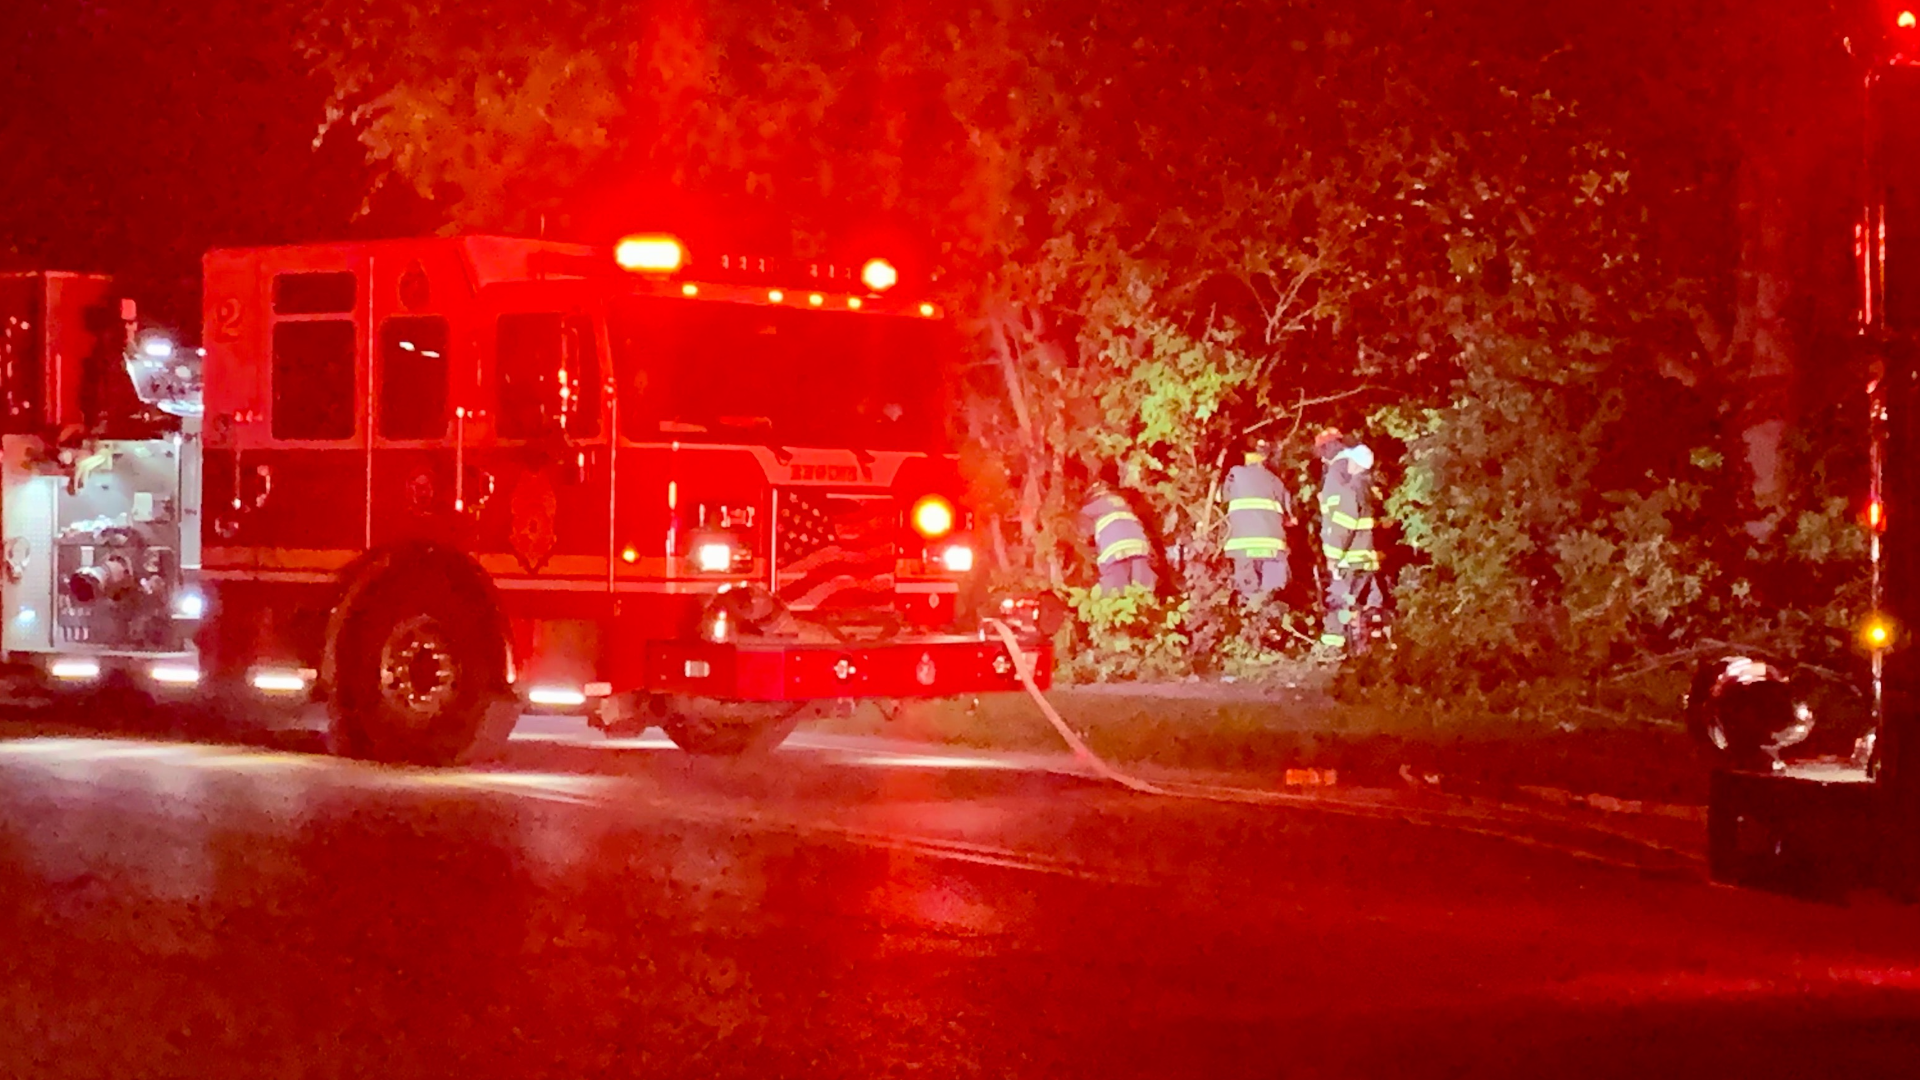 The crash happened at around 6:30 p.m. in the 9500 block of E. 42nd Street, near Diller Drive and just east of Post Road.